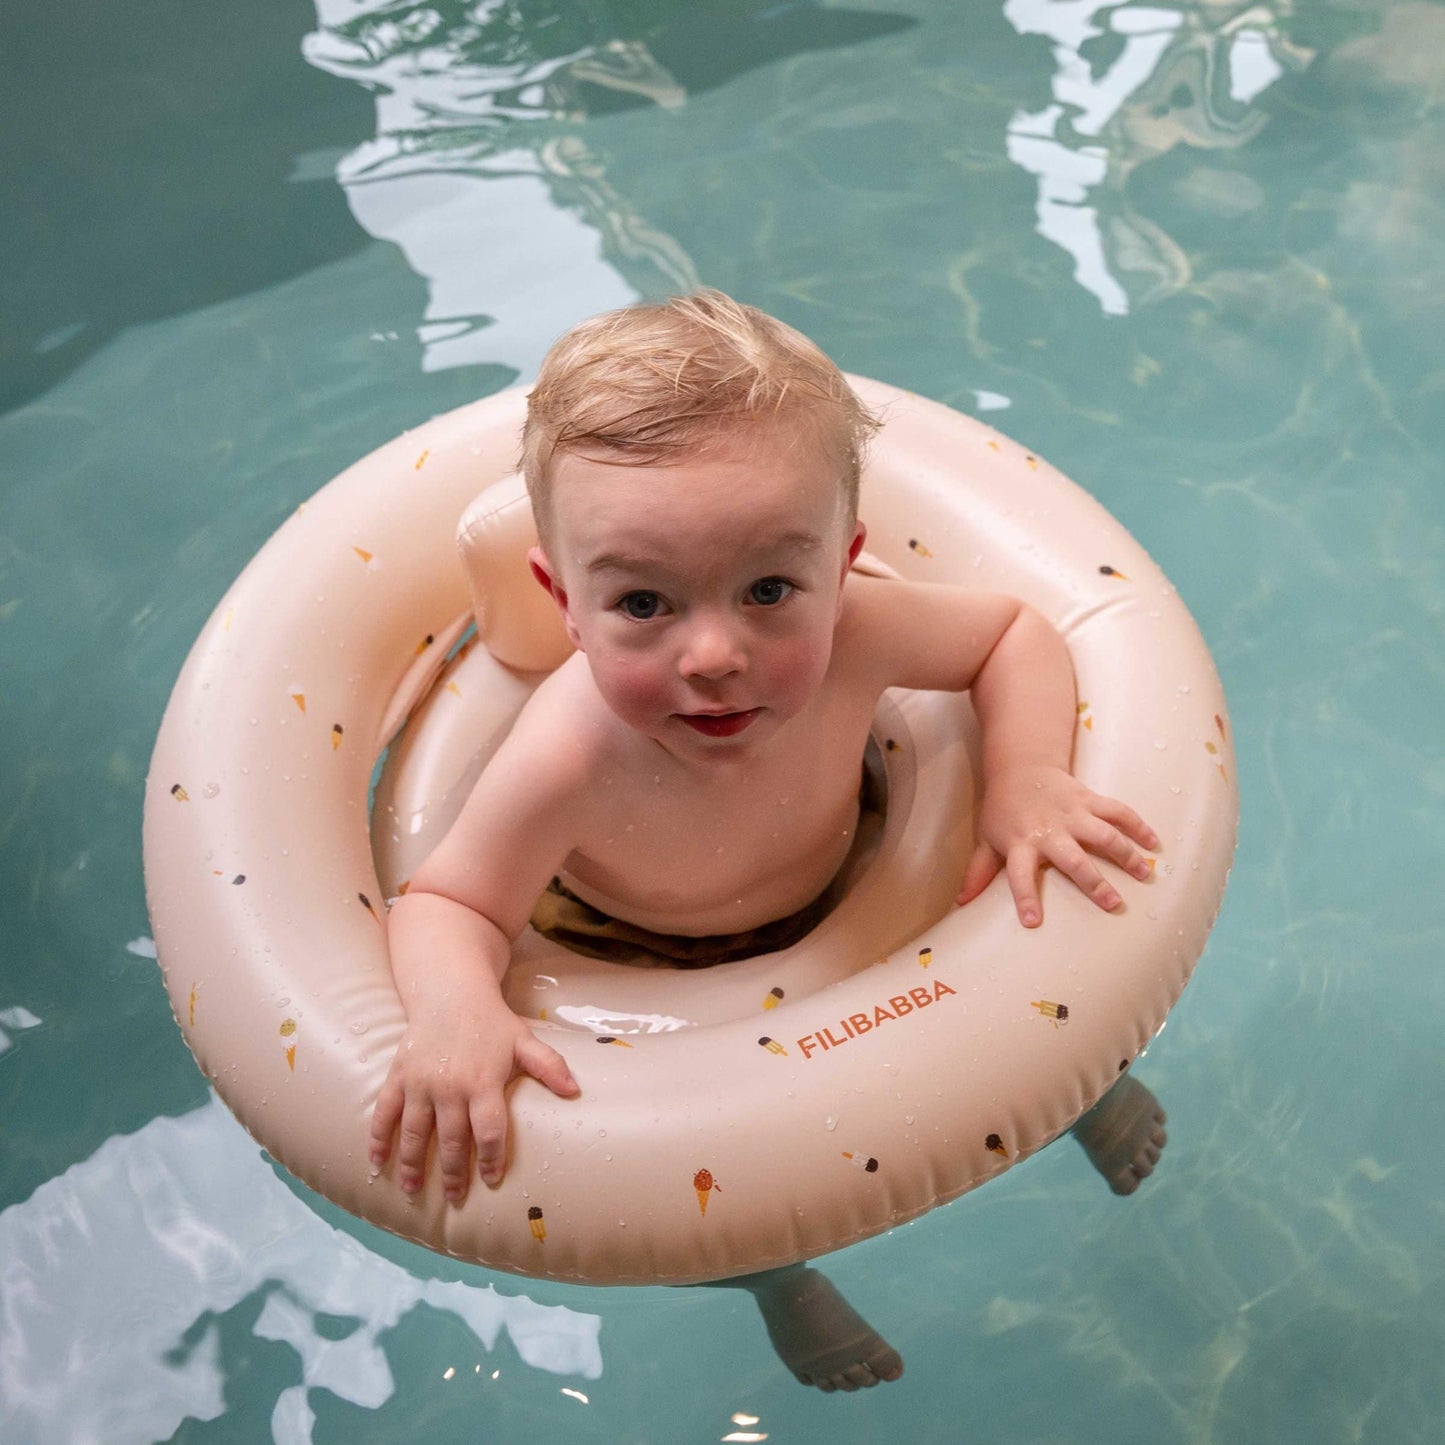 Baby inflatable Alfie - Cool Summer